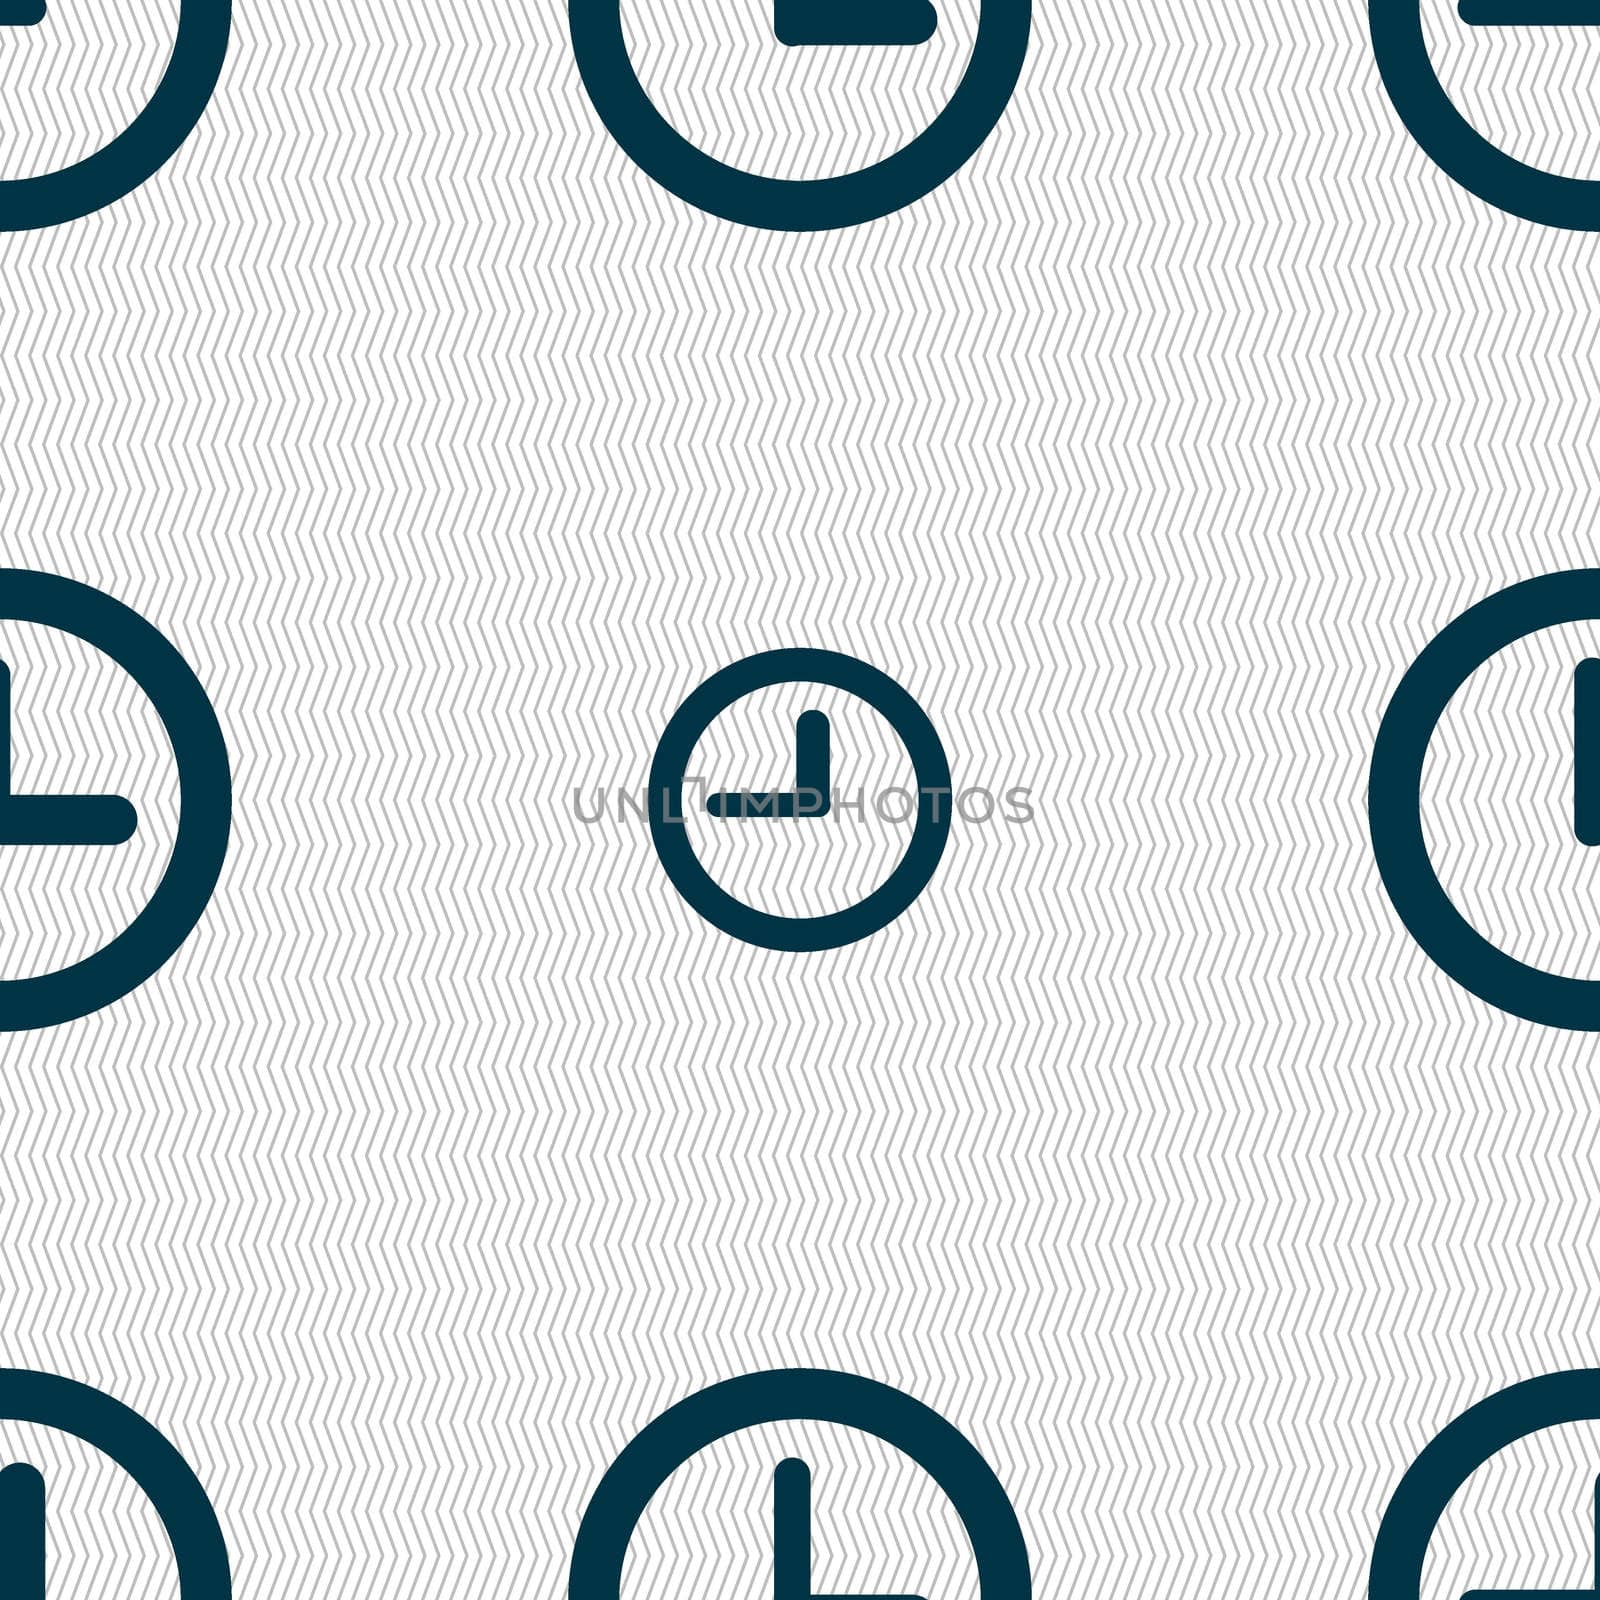 Clock sign icon. Mechanical clock symbol. Seamless abstract background with geometric shapes. illustration